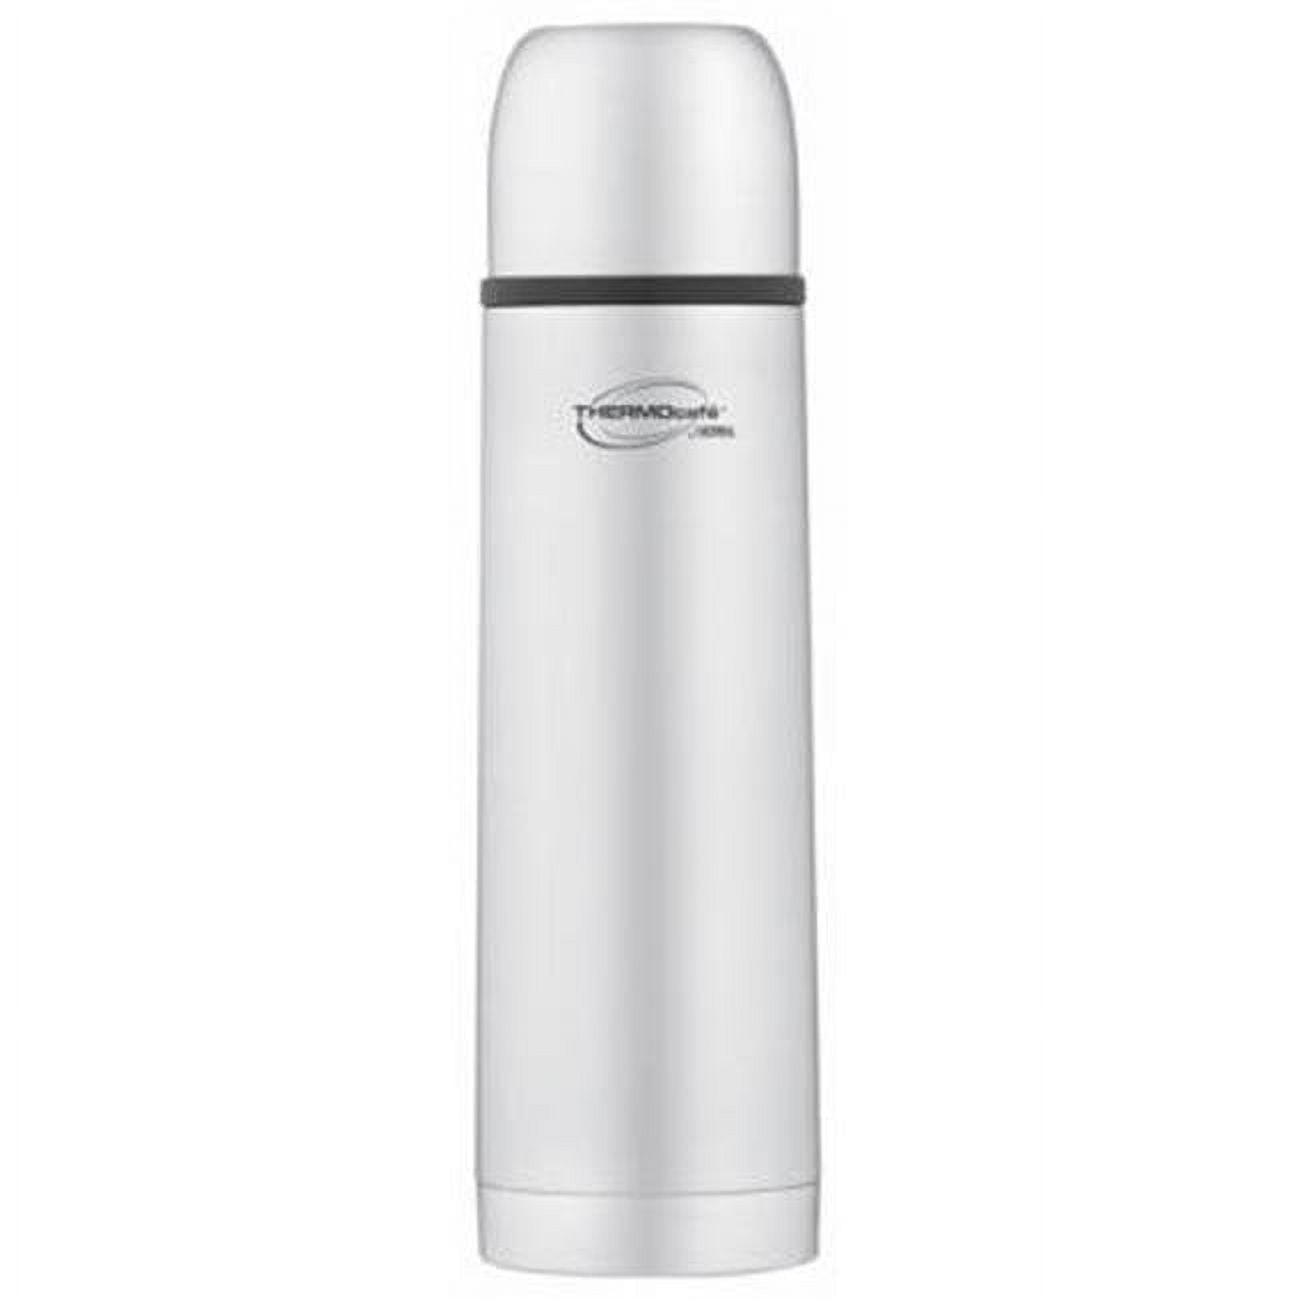 Thermos 24 oz. ThermoCafe Stainless Steel Travel Mug - Stainless Steel/Black